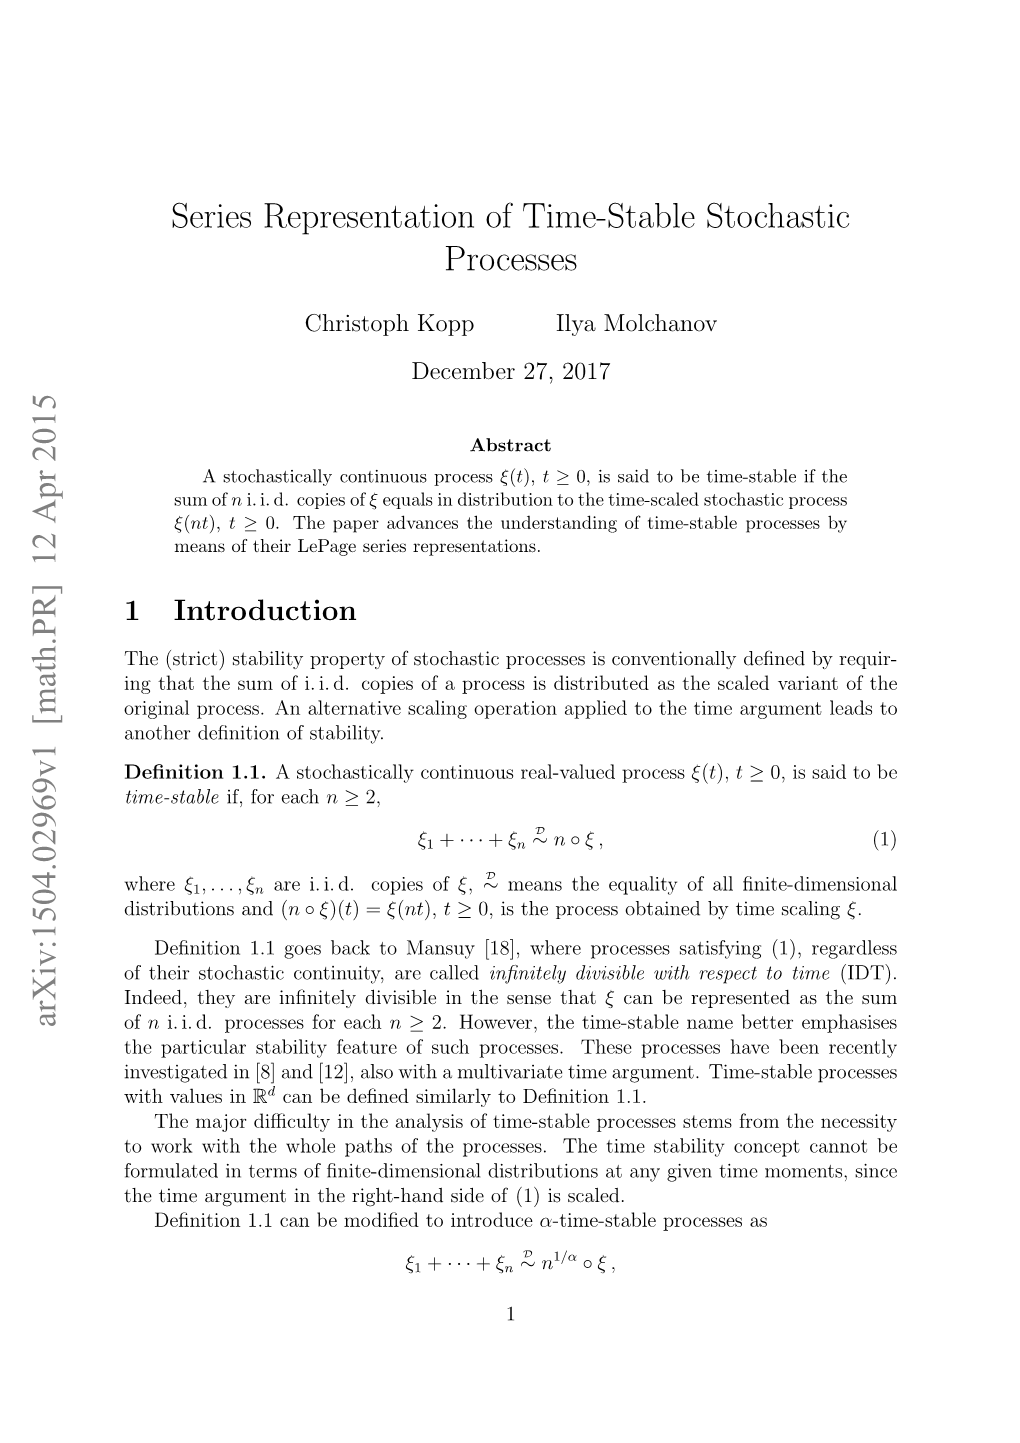 Series Representation of Time-Stable Stochastic Processes